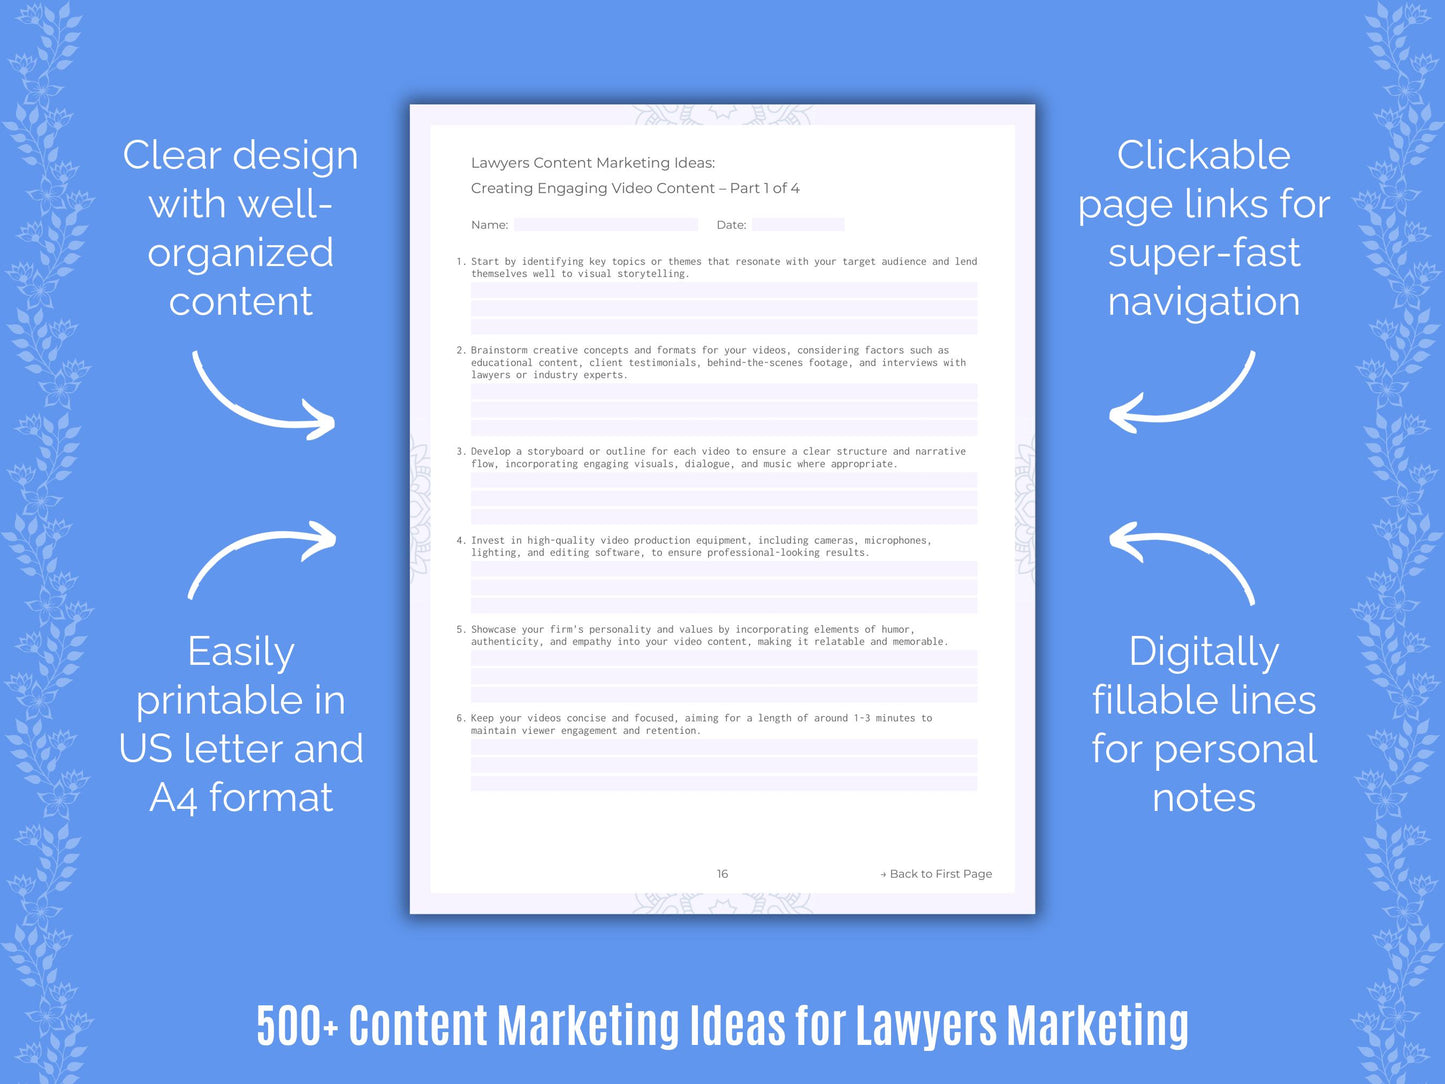 Lawyers Content Marketing Ideas